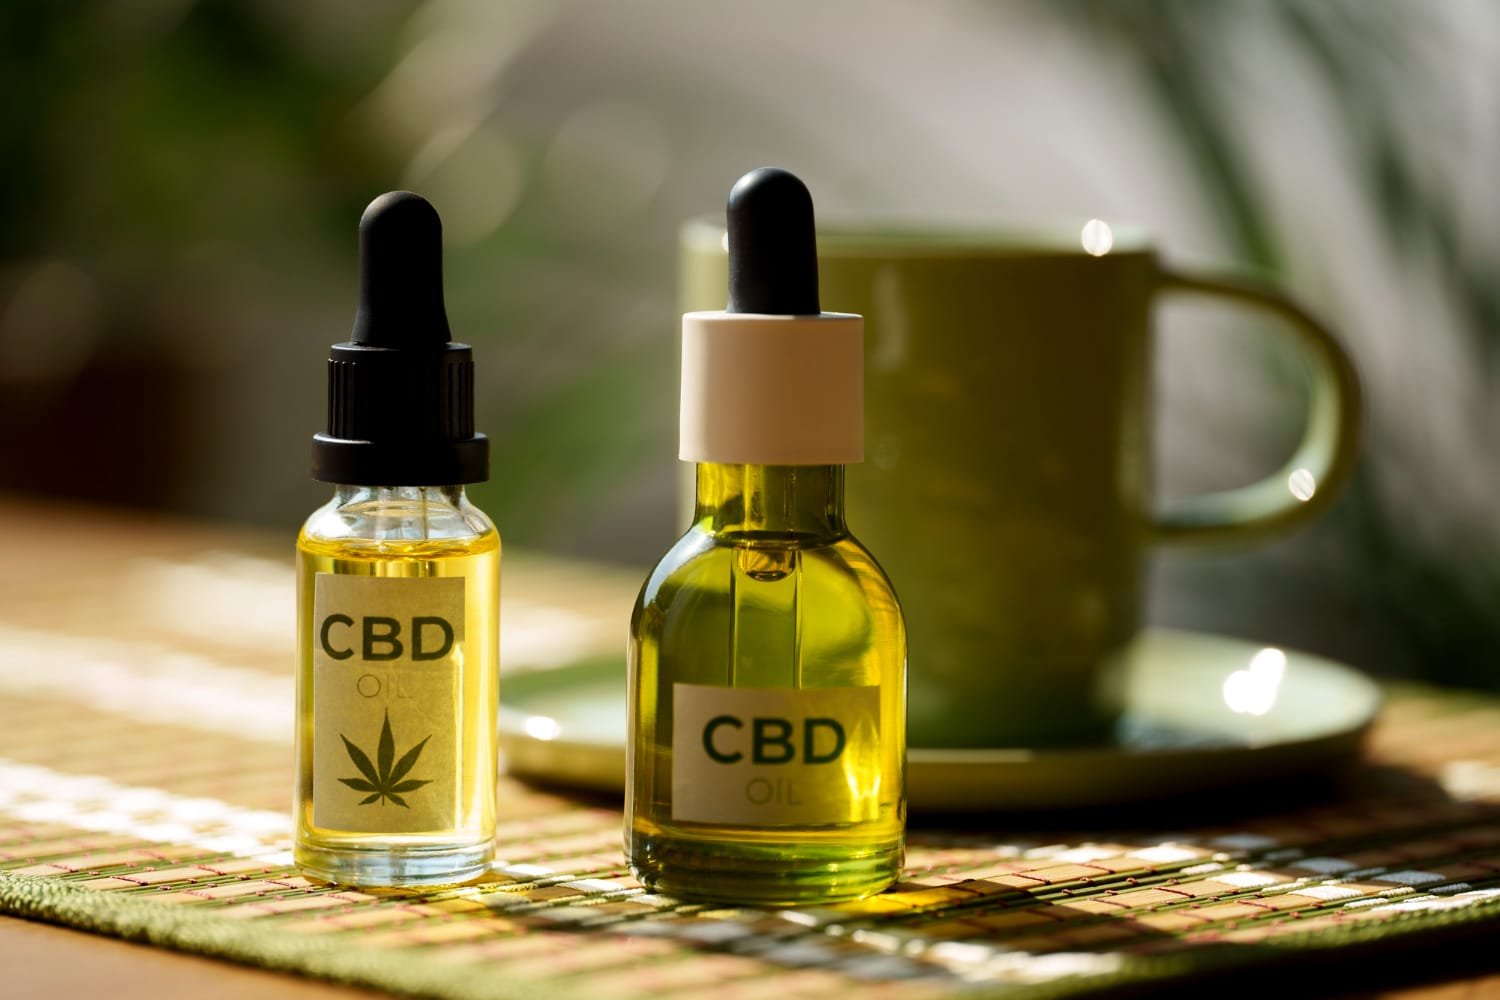 You are currently viewing Discover the Benefits of CBD with Just CBD’s Diverse Product Line